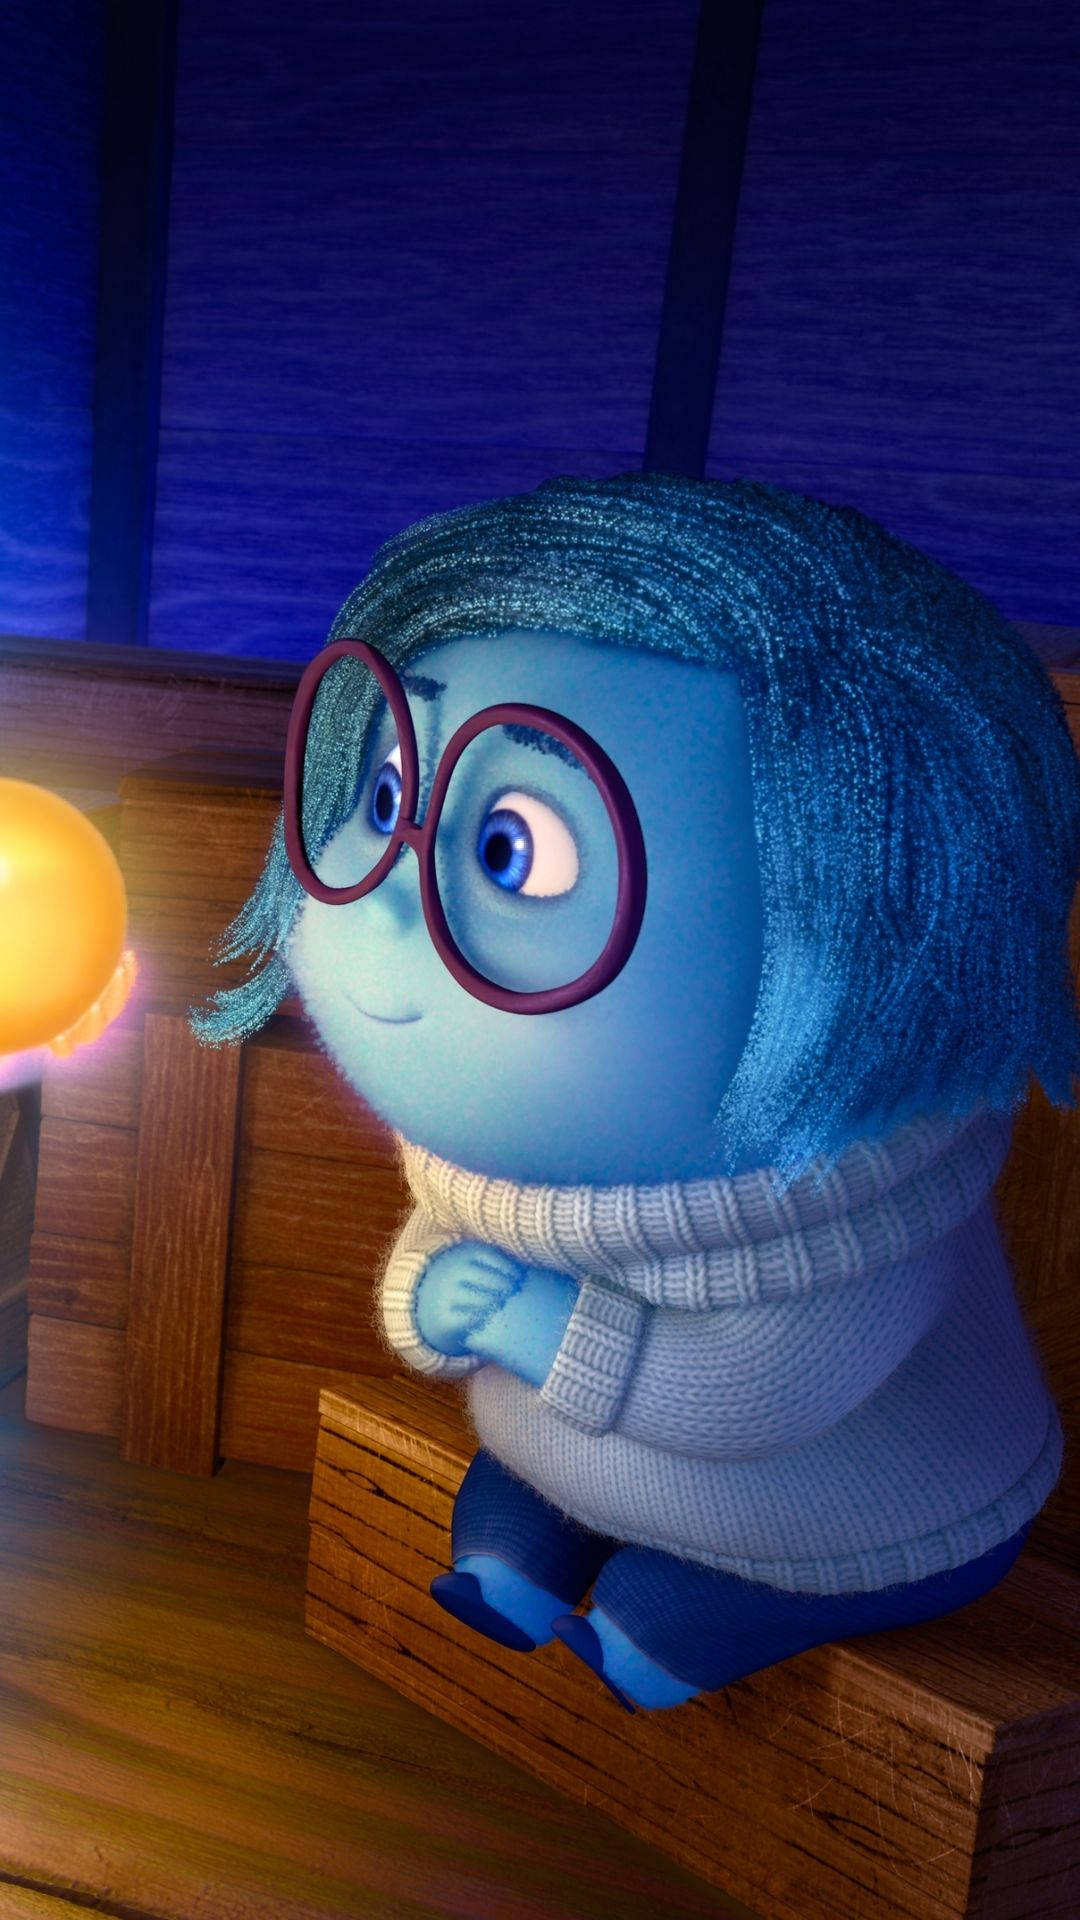 "Hey, let's look on the bright side!" -Sadness, Inside Out Wallpaper